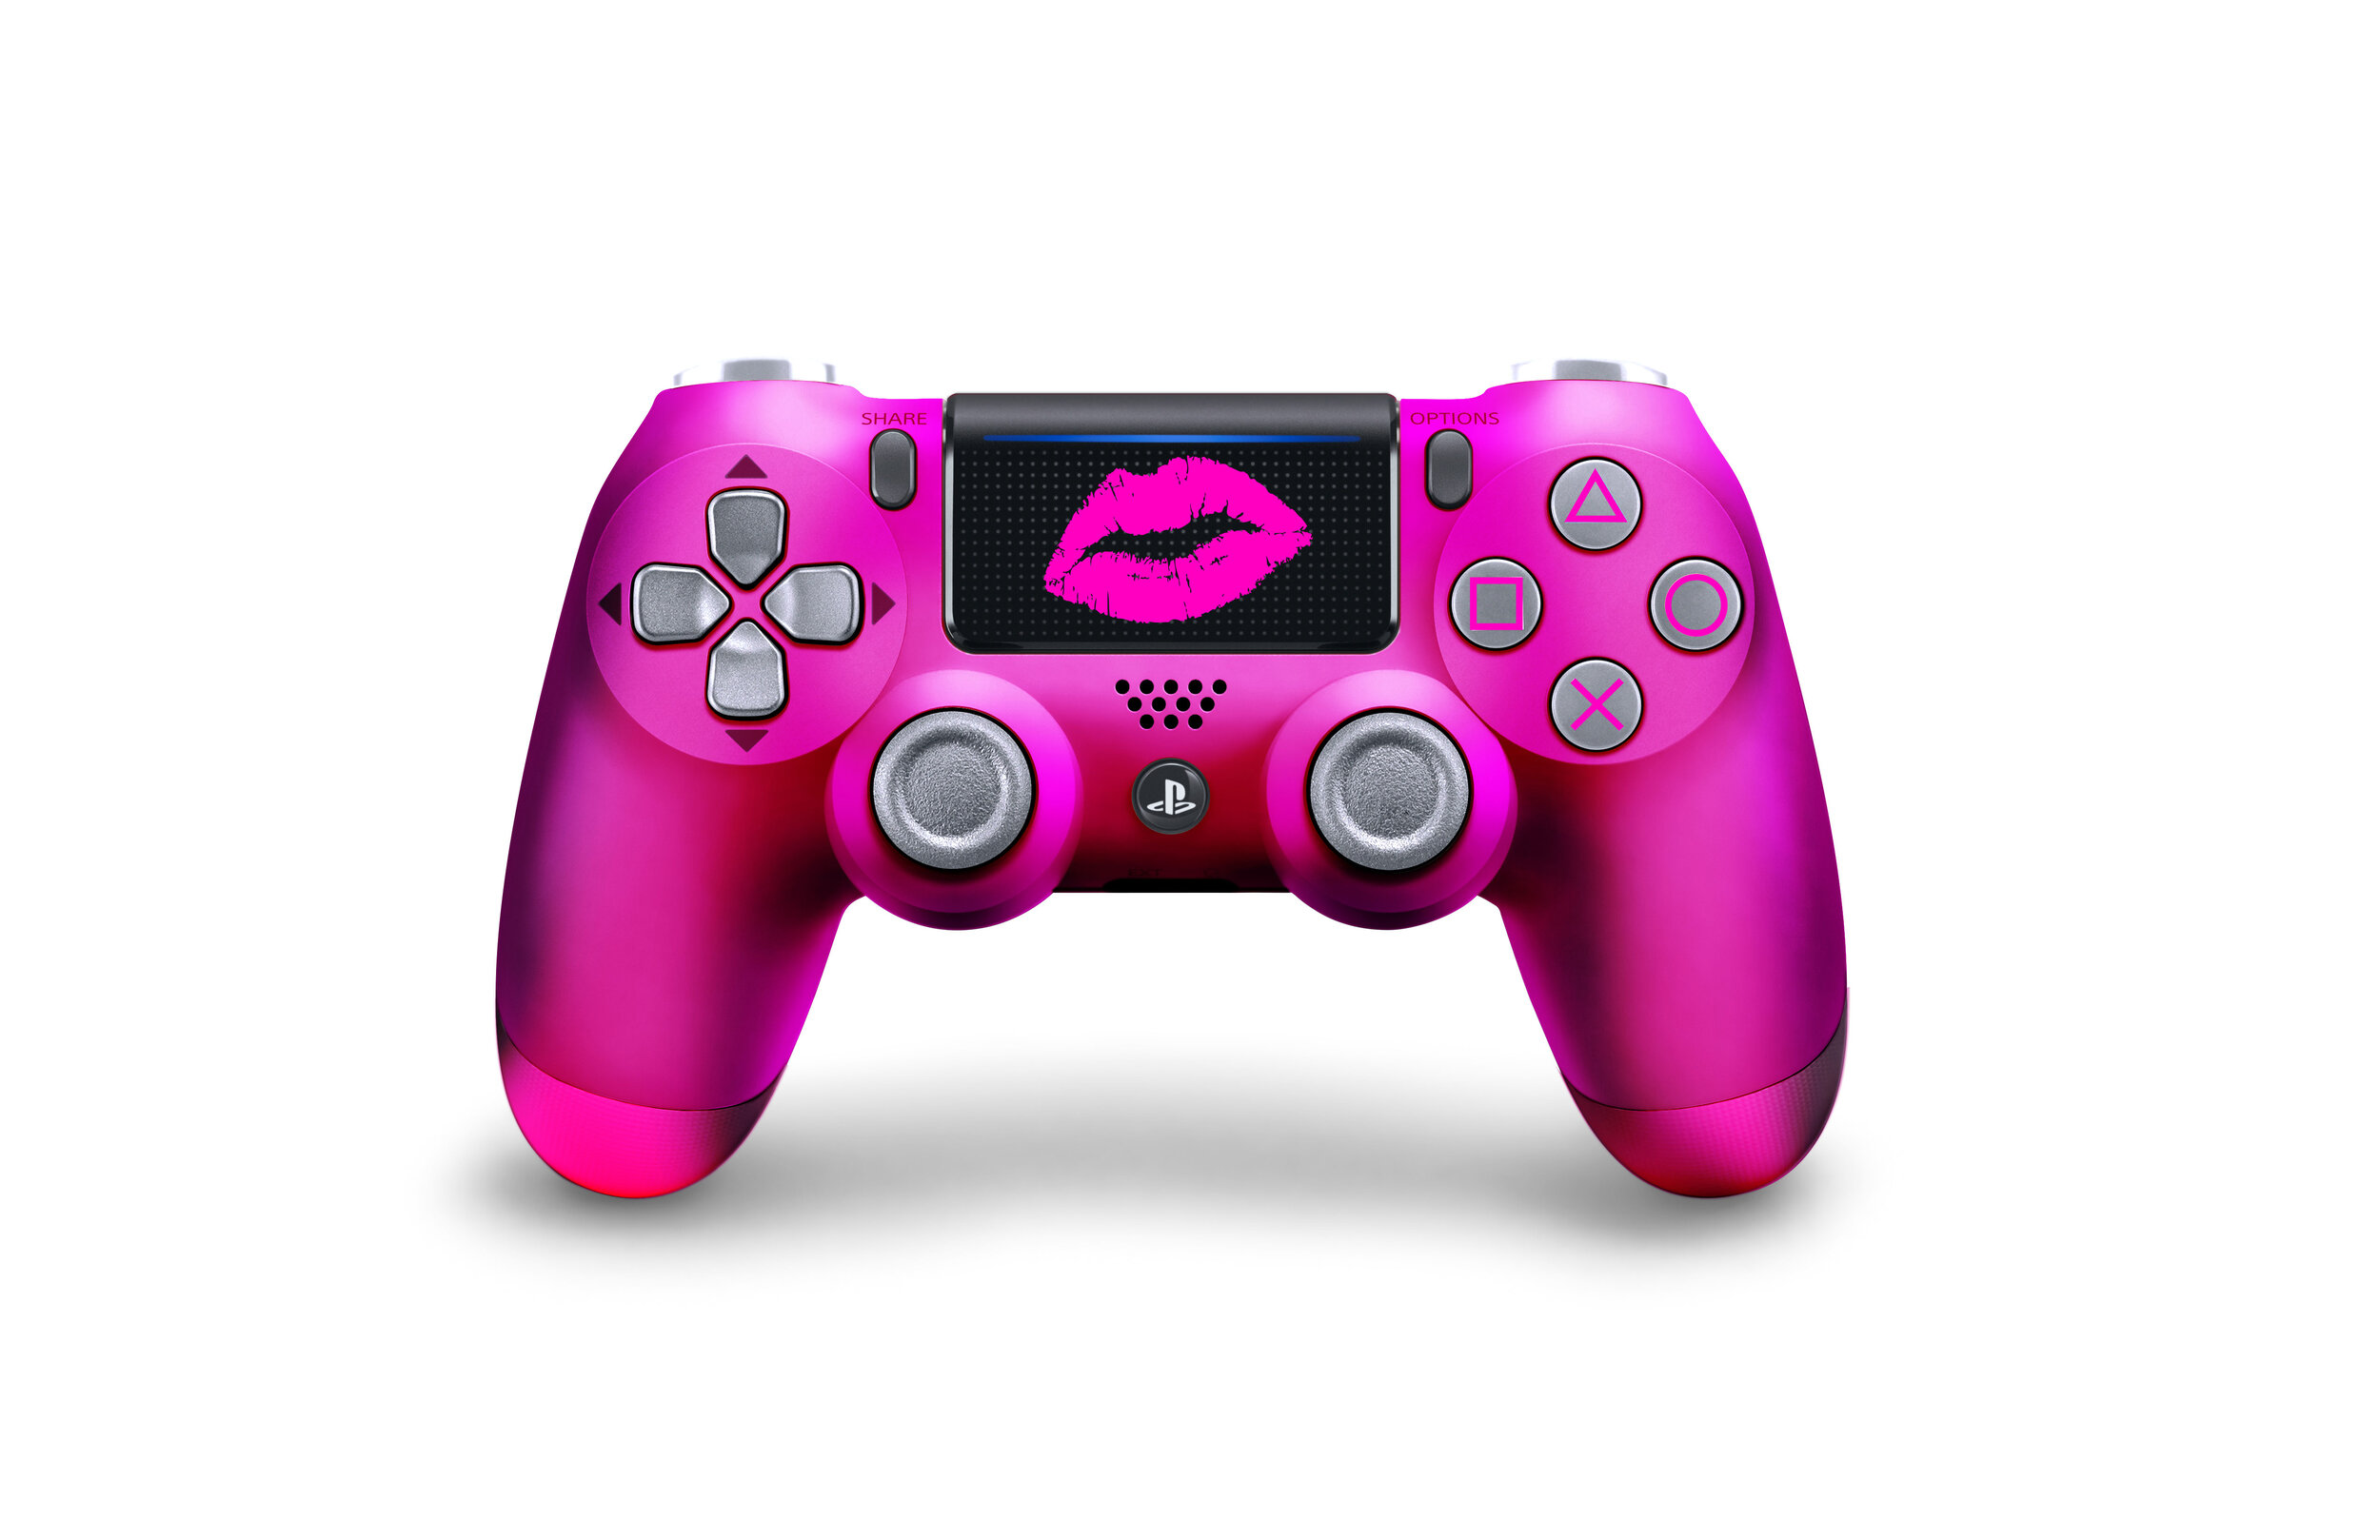 DS4_HEADSET_THEMES_Q3_2018_JH_HOTPINK_001A.jpg